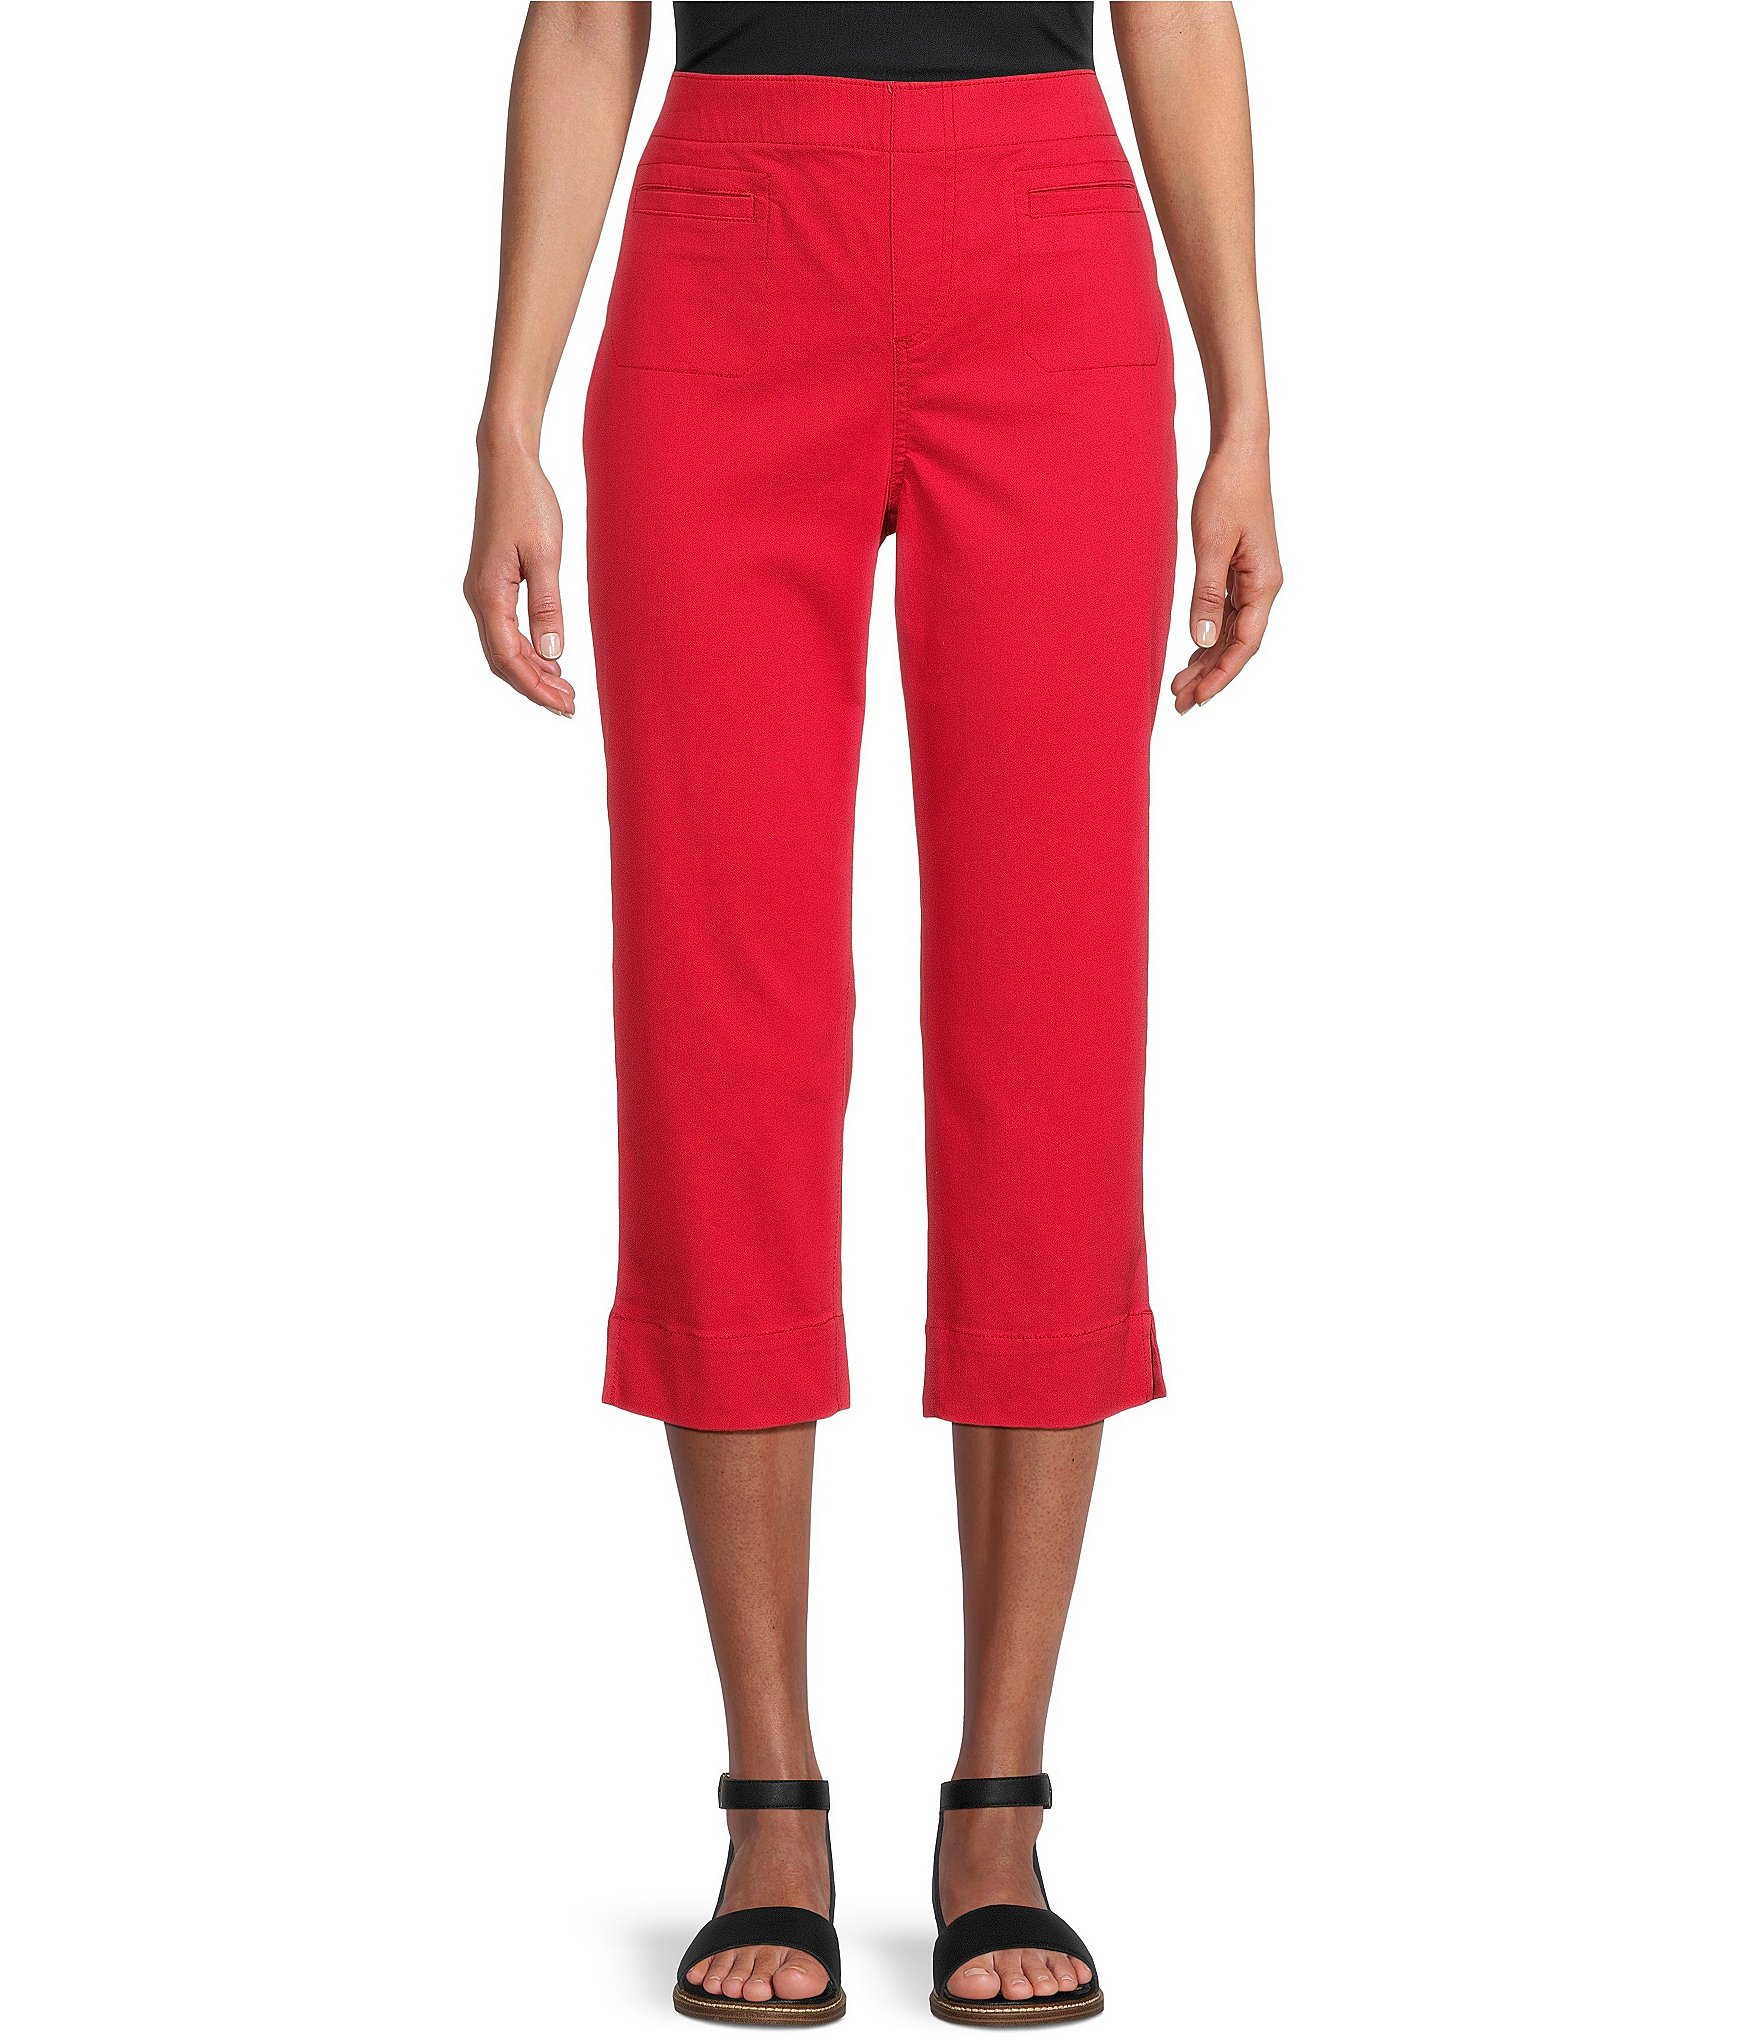 VINCE CAMUTO Women's Red Lined Full Coverage Ruched High Waisted